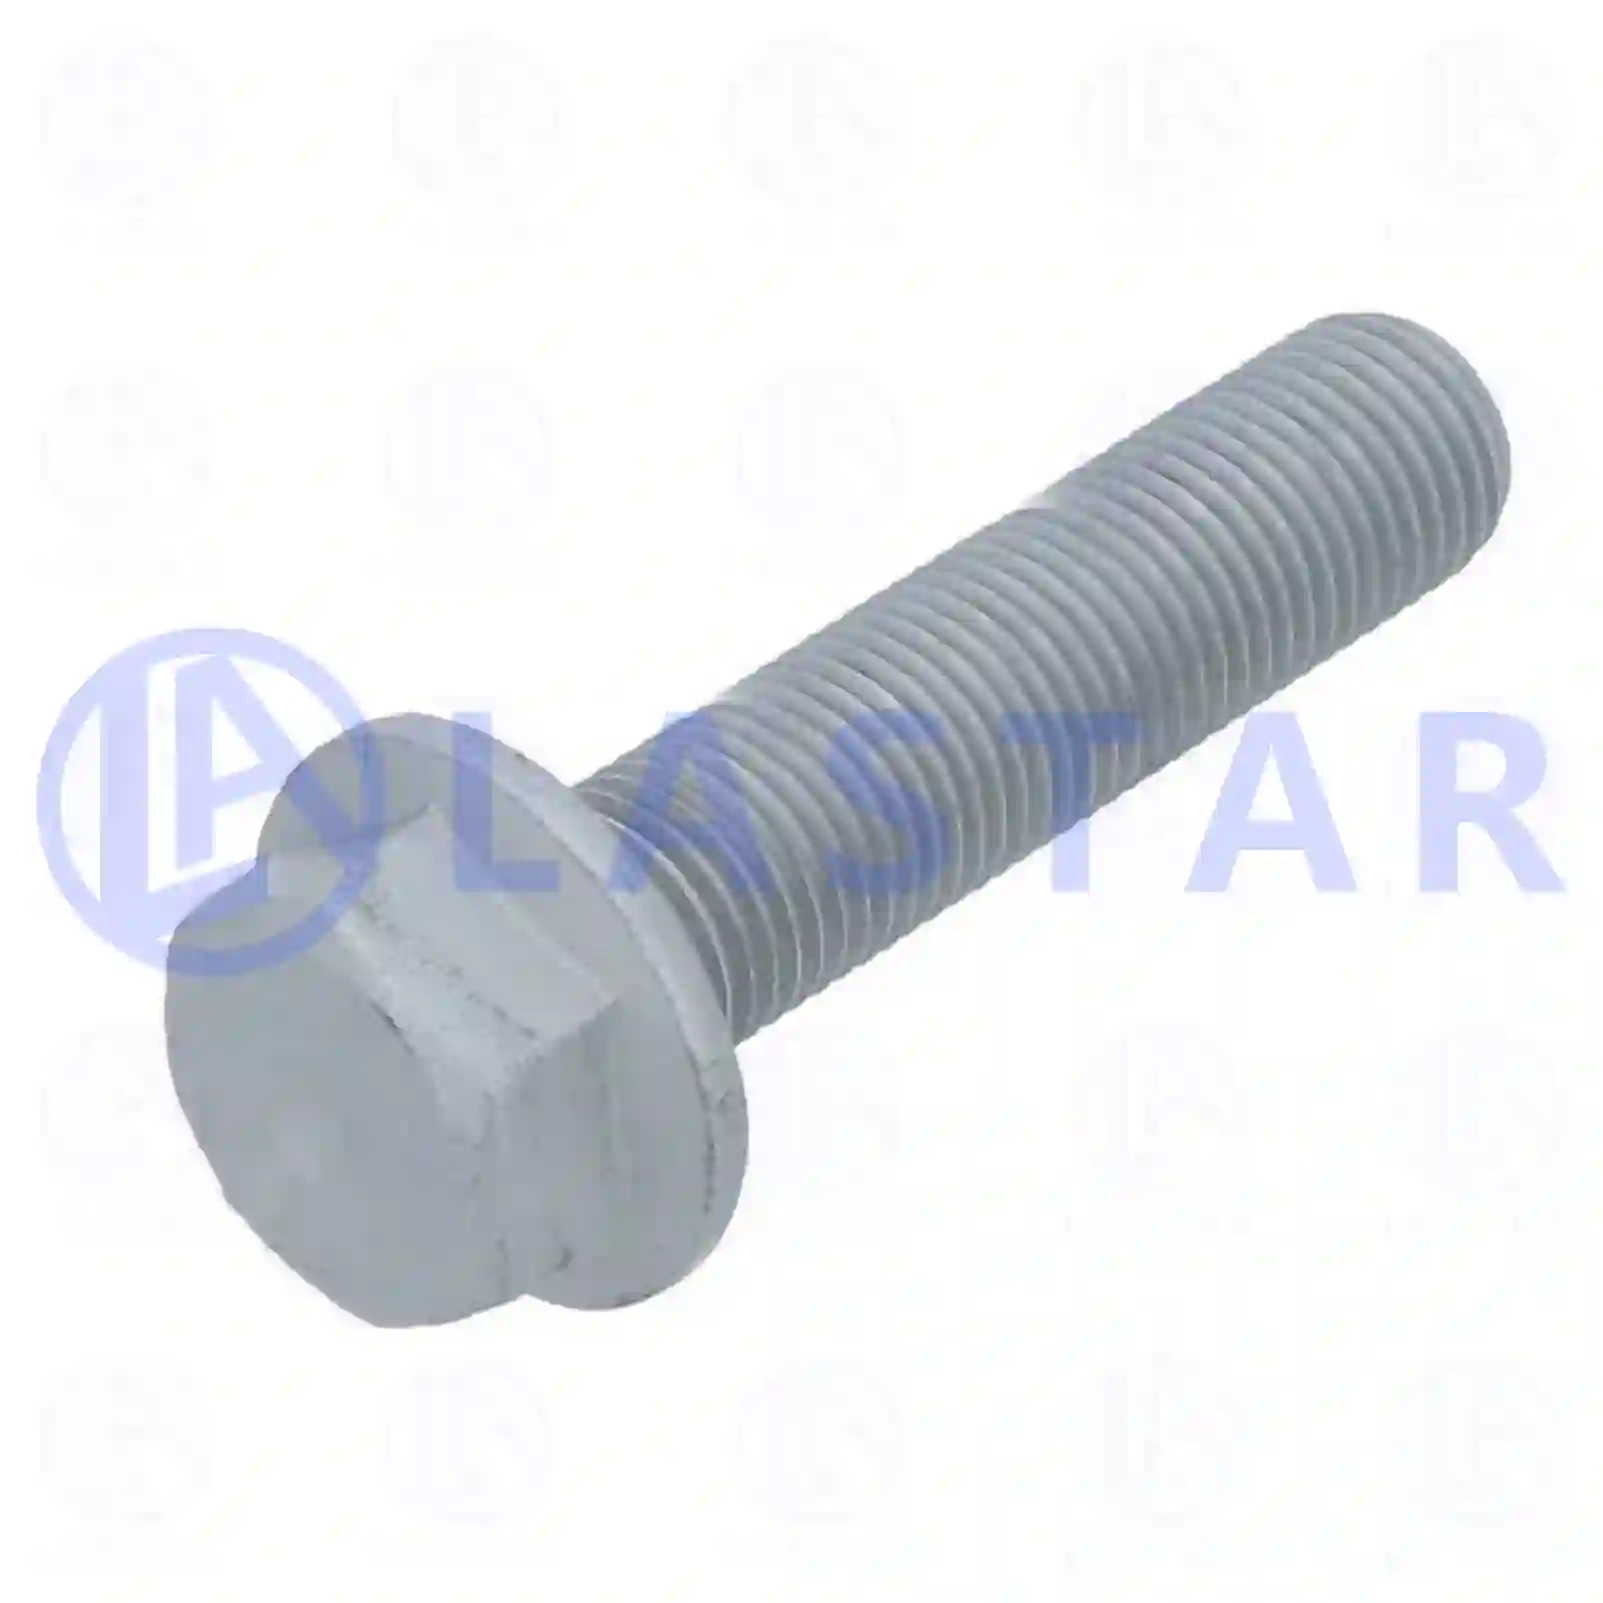 Screw, 77727719, 910105014019, 5003002075, ZG40285-0008, , ||  77727719 Lastar Spare Part | Truck Spare Parts, Auotomotive Spare Parts Screw, 77727719, 910105014019, 5003002075, ZG40285-0008, , ||  77727719 Lastar Spare Part | Truck Spare Parts, Auotomotive Spare Parts